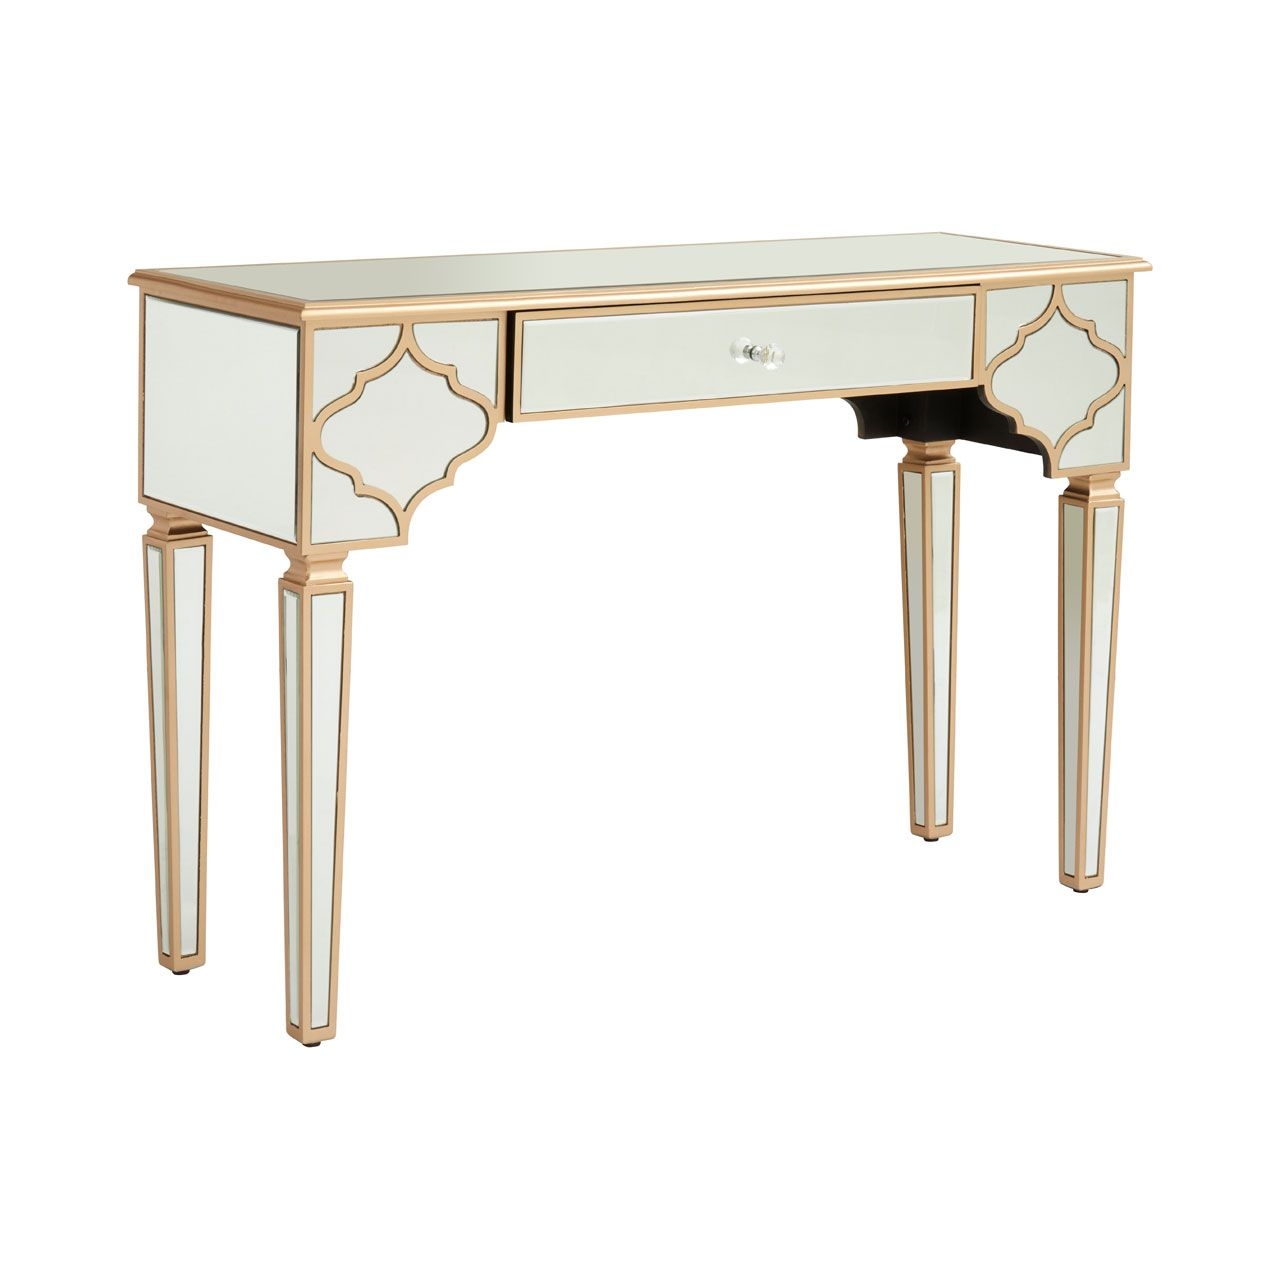 Dziban Mirrored Glass Console Table In Crystal With 1 Drawer